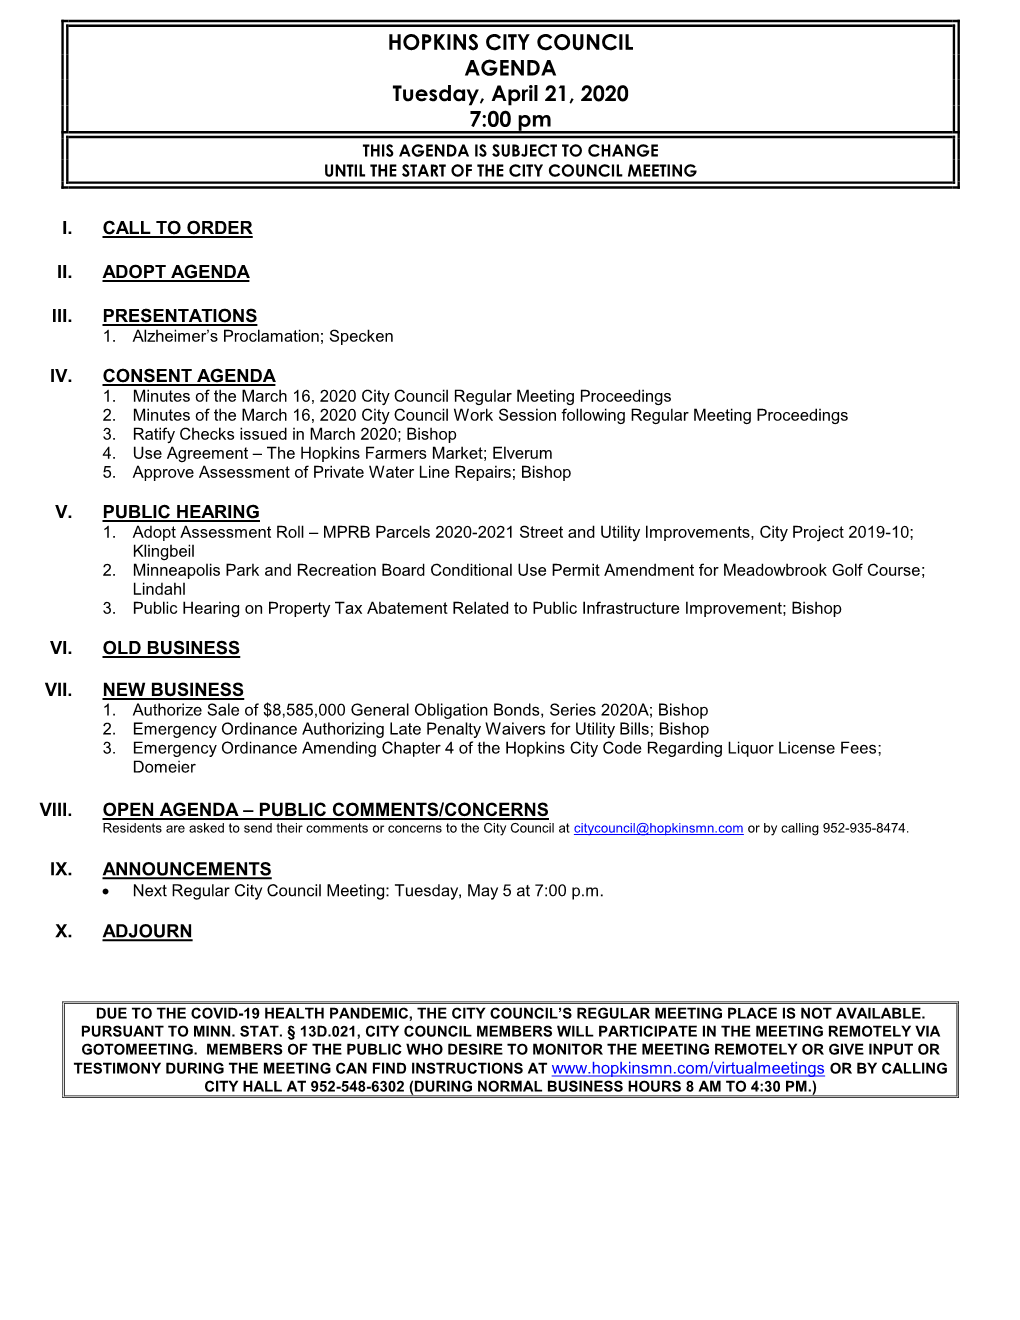 HOPKINS CITY COUNCIL AGENDA Tuesday, April 21, 2020 7:00 Pm THIS AGENDA IS SUBJECT to CHANGE UNTIL the START of the CITY COUNCIL MEETING